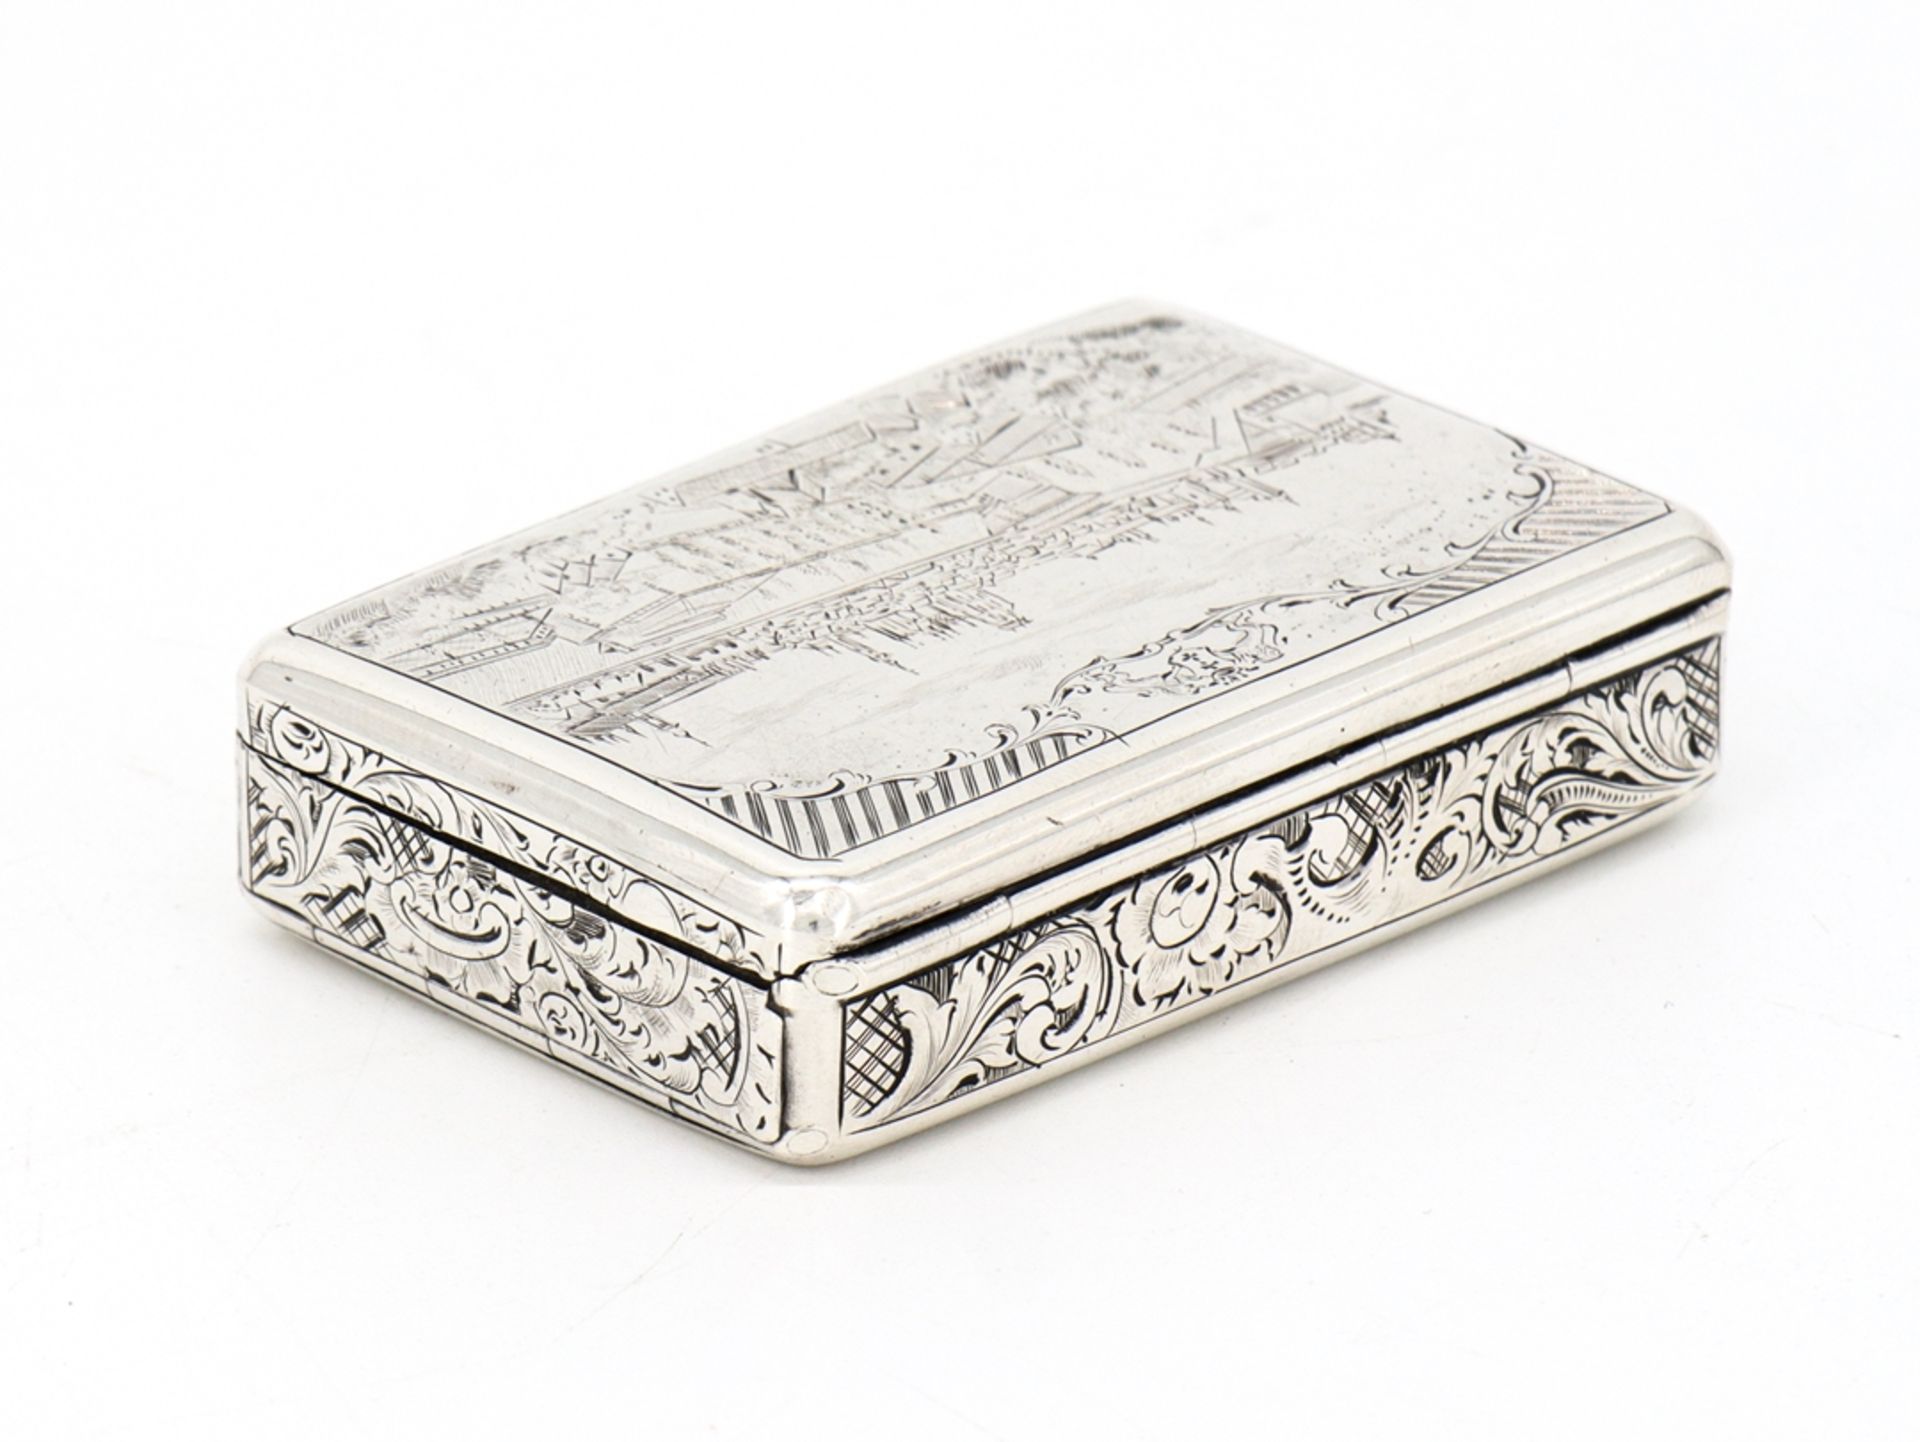 Match silver case with finely chased city view, around 1850 - Image 3 of 9